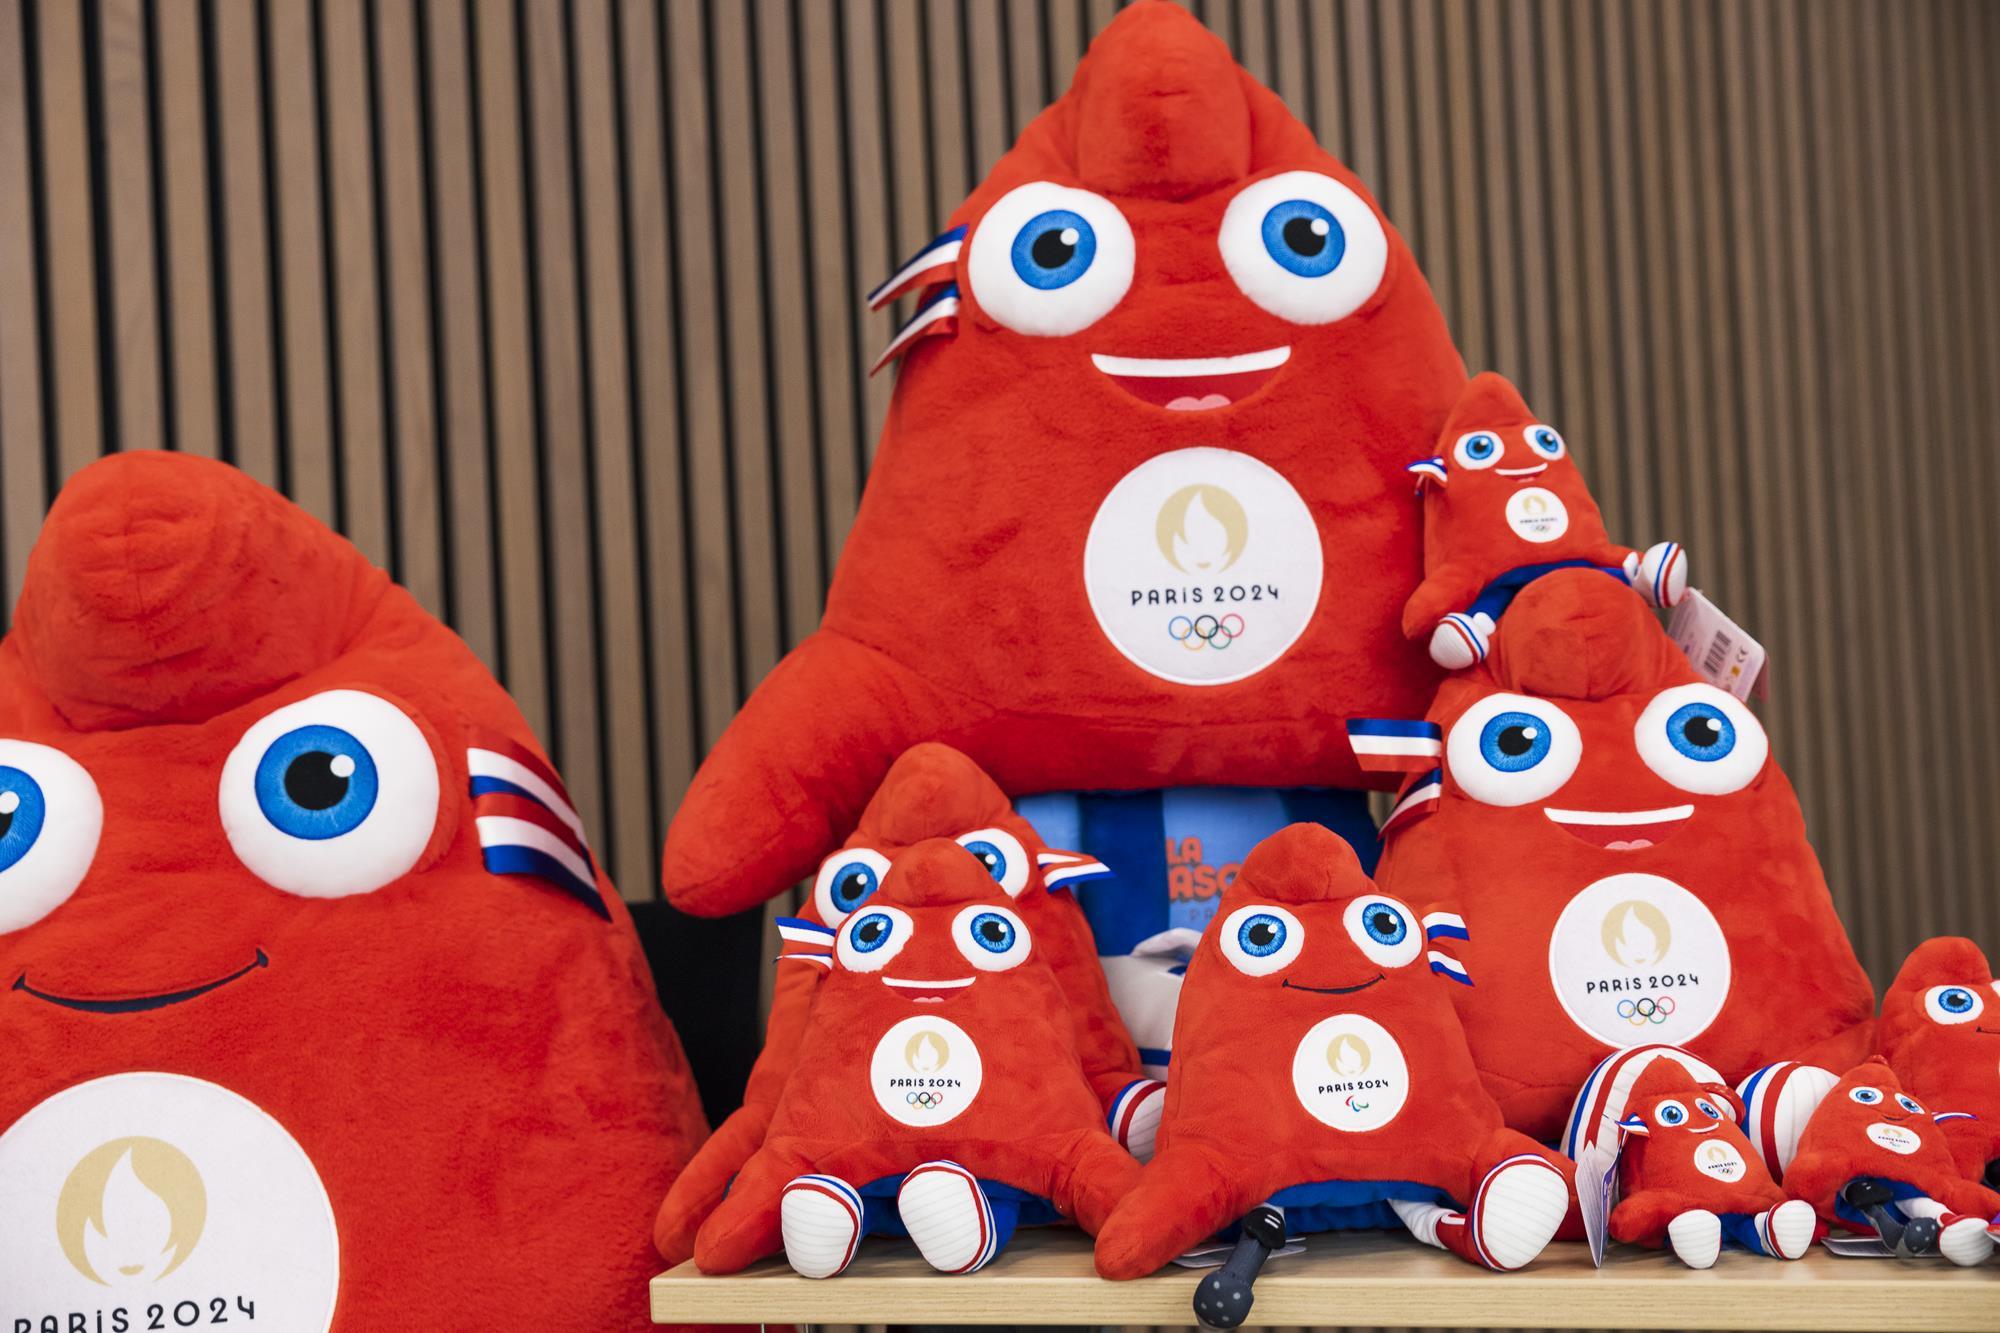 The Paralympic Phryges plush toy mascots for the Paris 2024